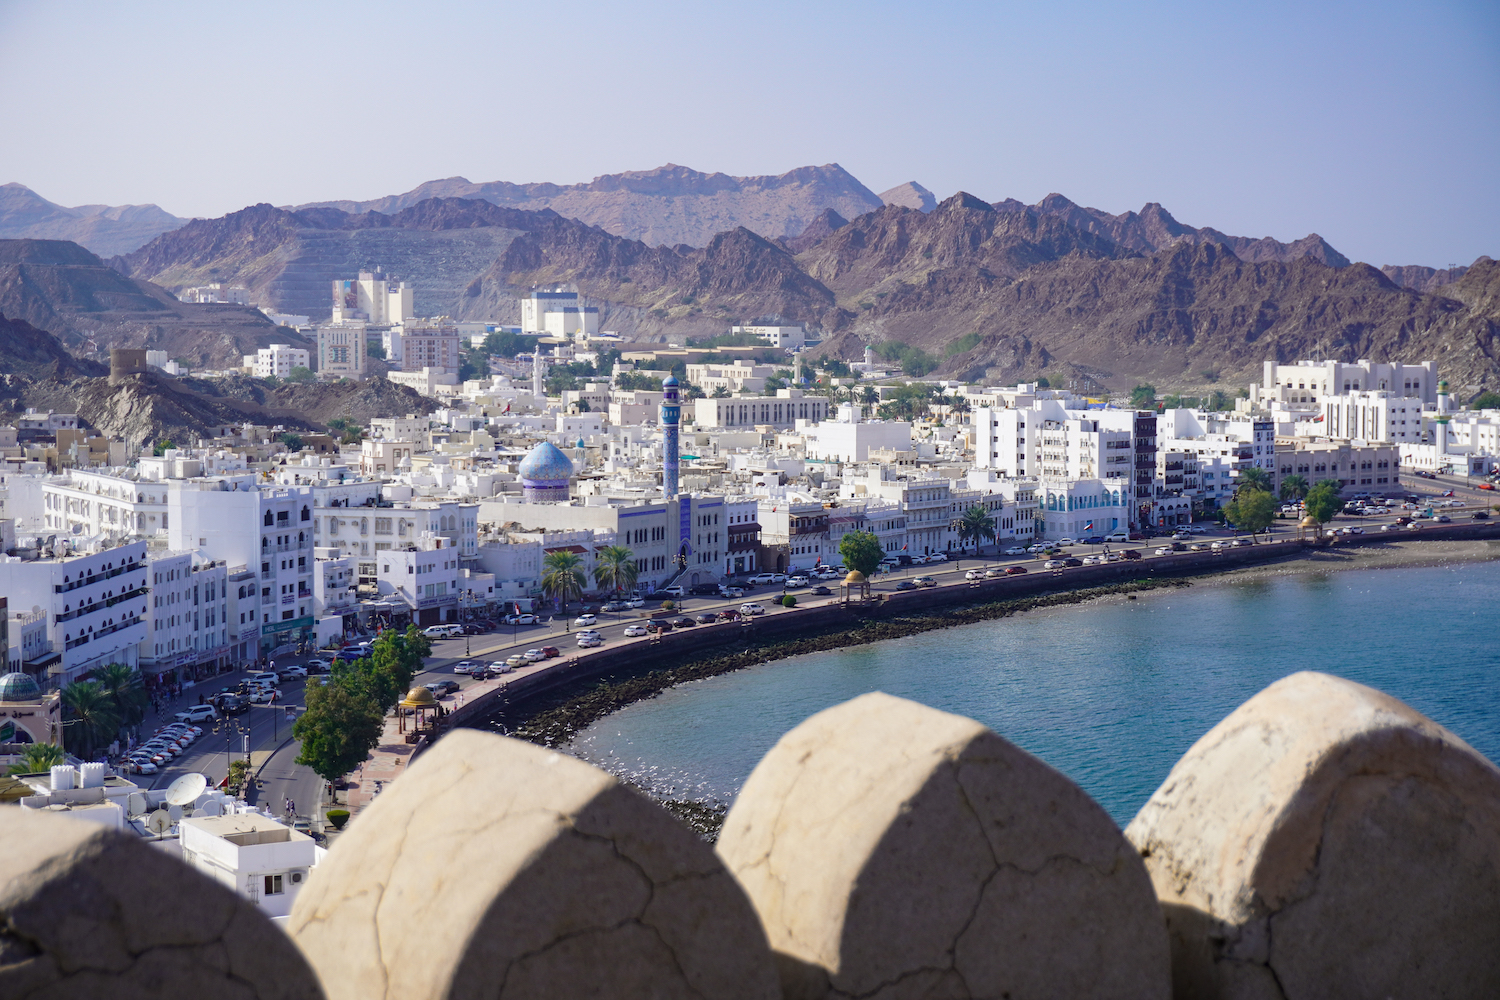 The Mutrah Corniche features white buildings and the radiant blue Mosque of the Great Prophet.